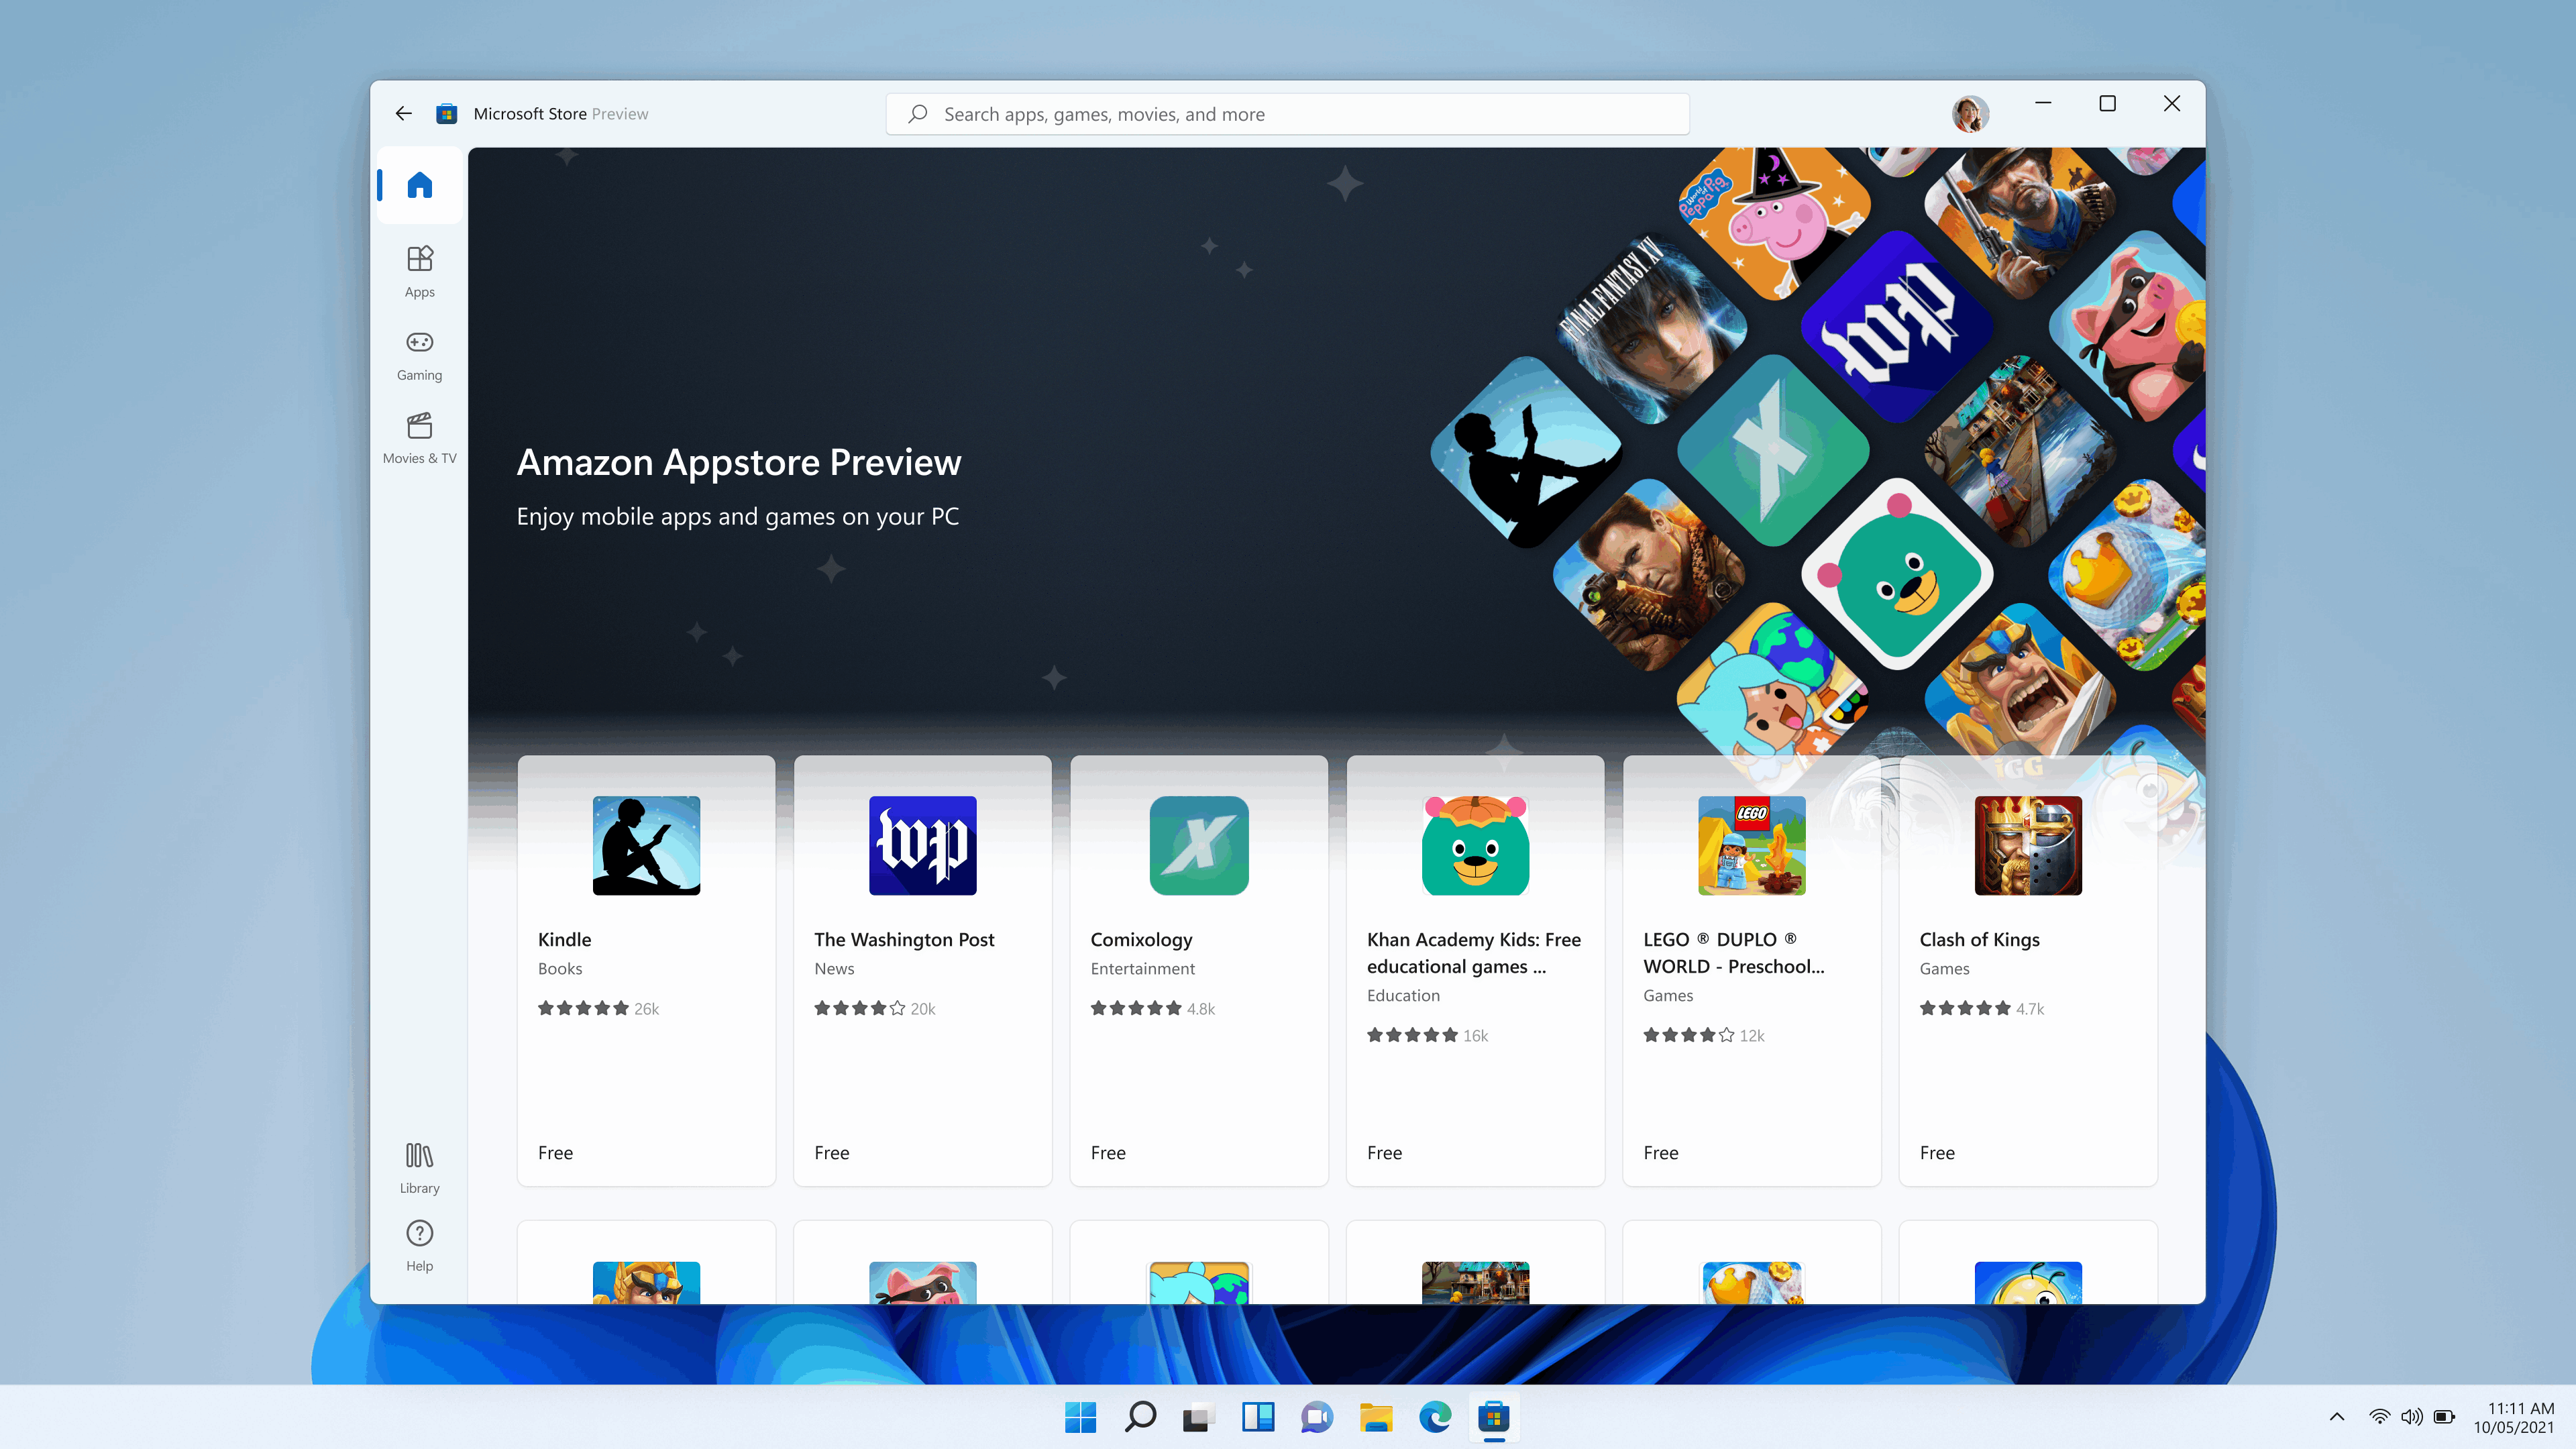 how to download google play store on laptop windows 10